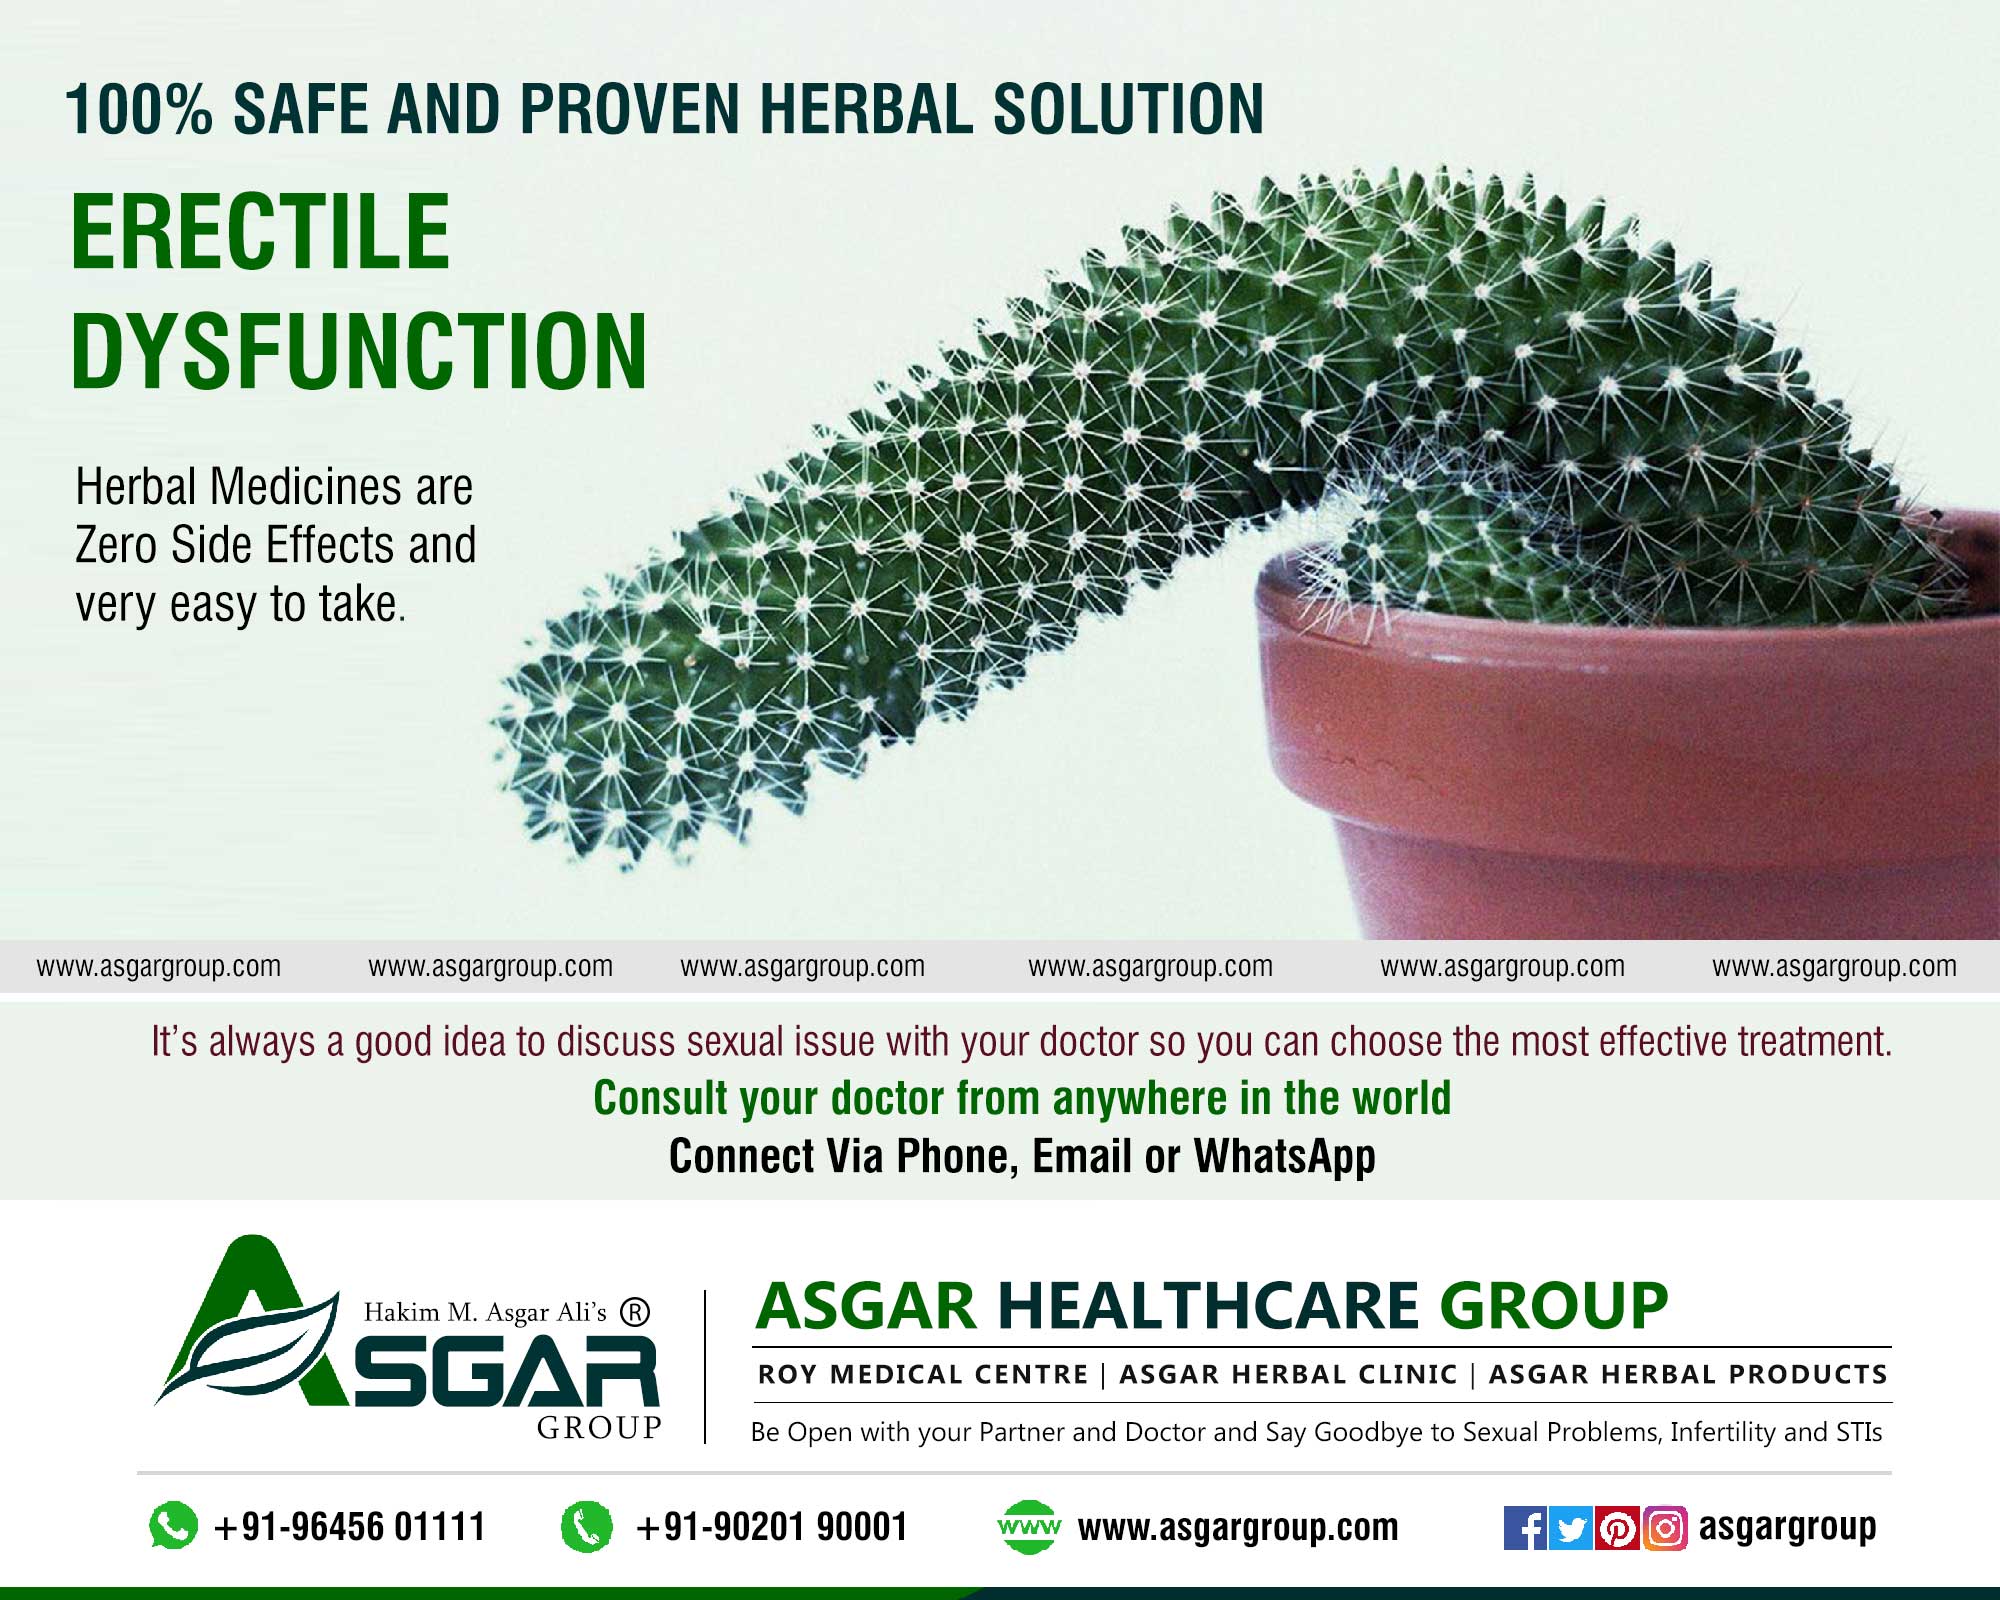 Safe proven natural Herbal solutions Erectile Dysfunction and Sexual weakness Treatment Kerala India